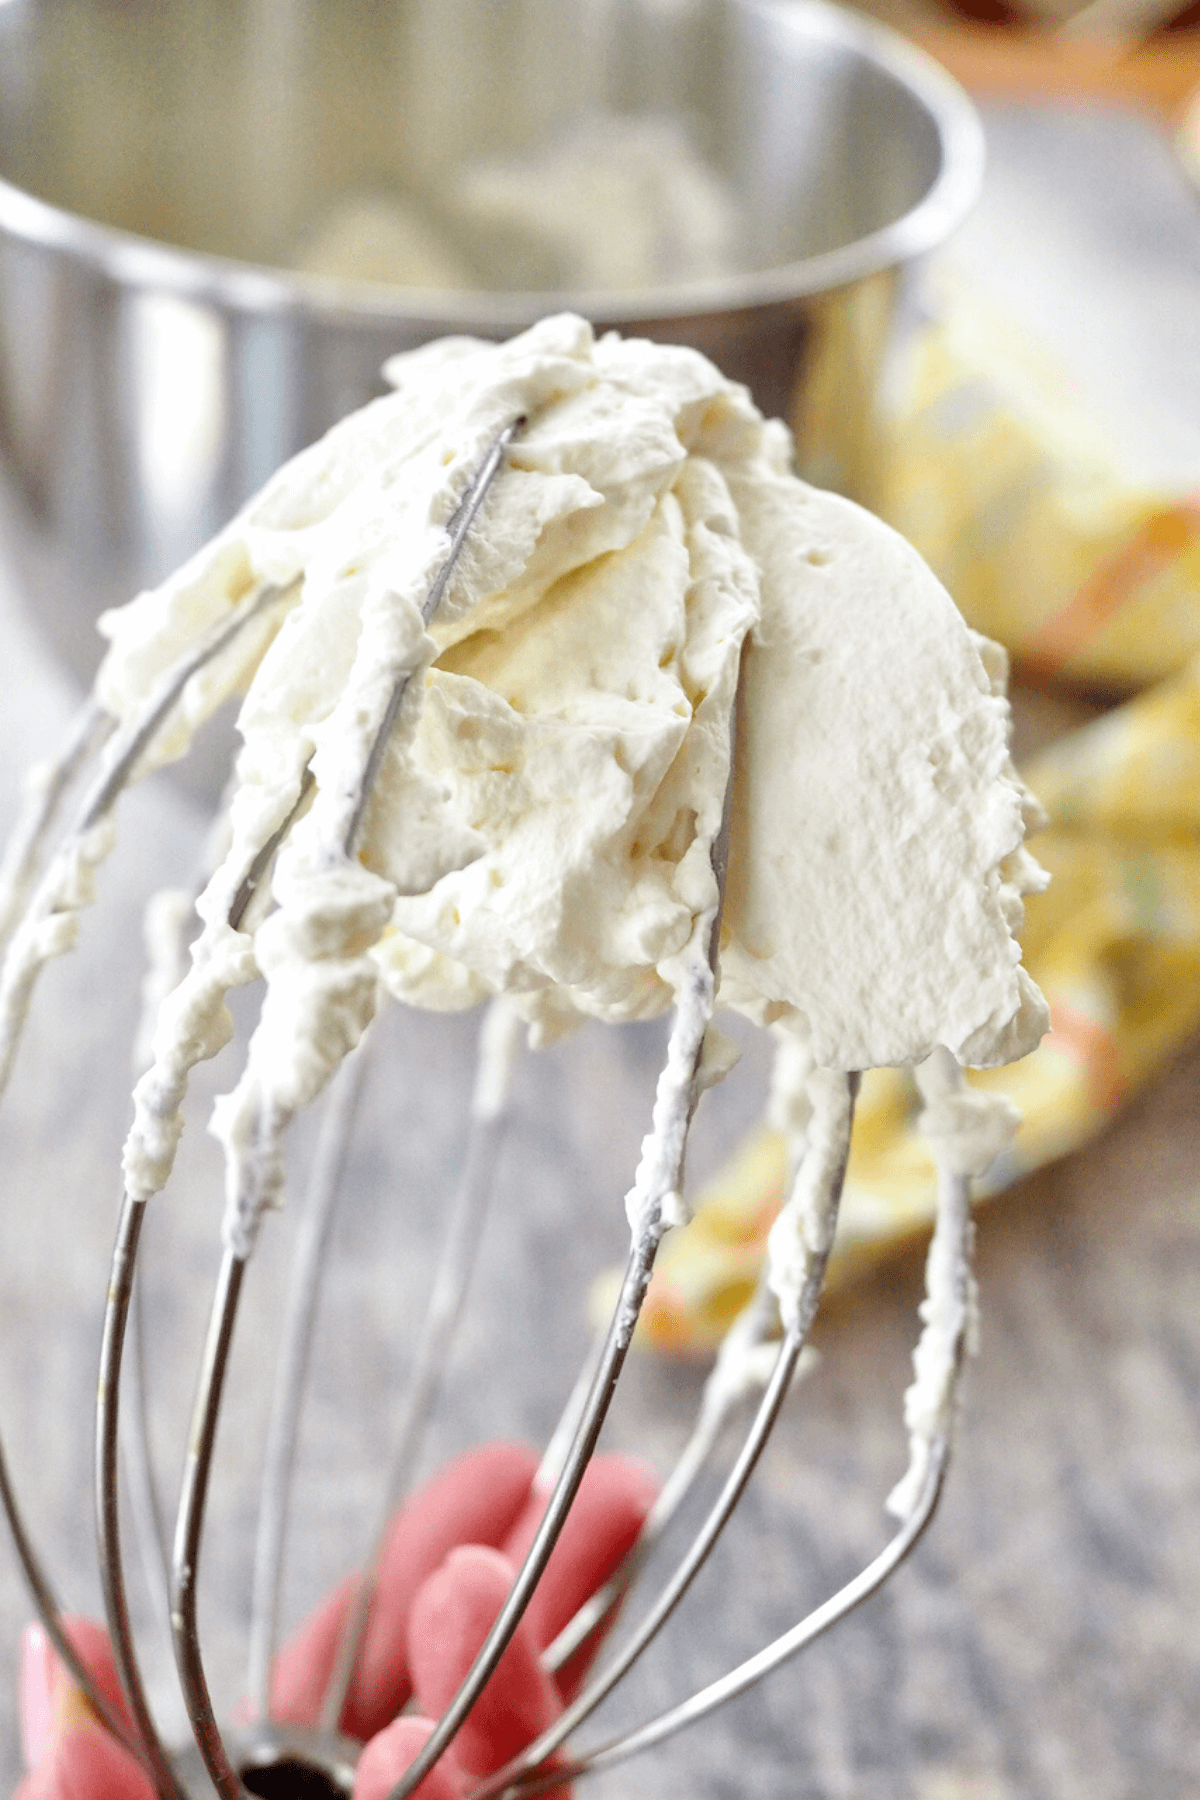 Stabilized whipped cream on wire whisk.